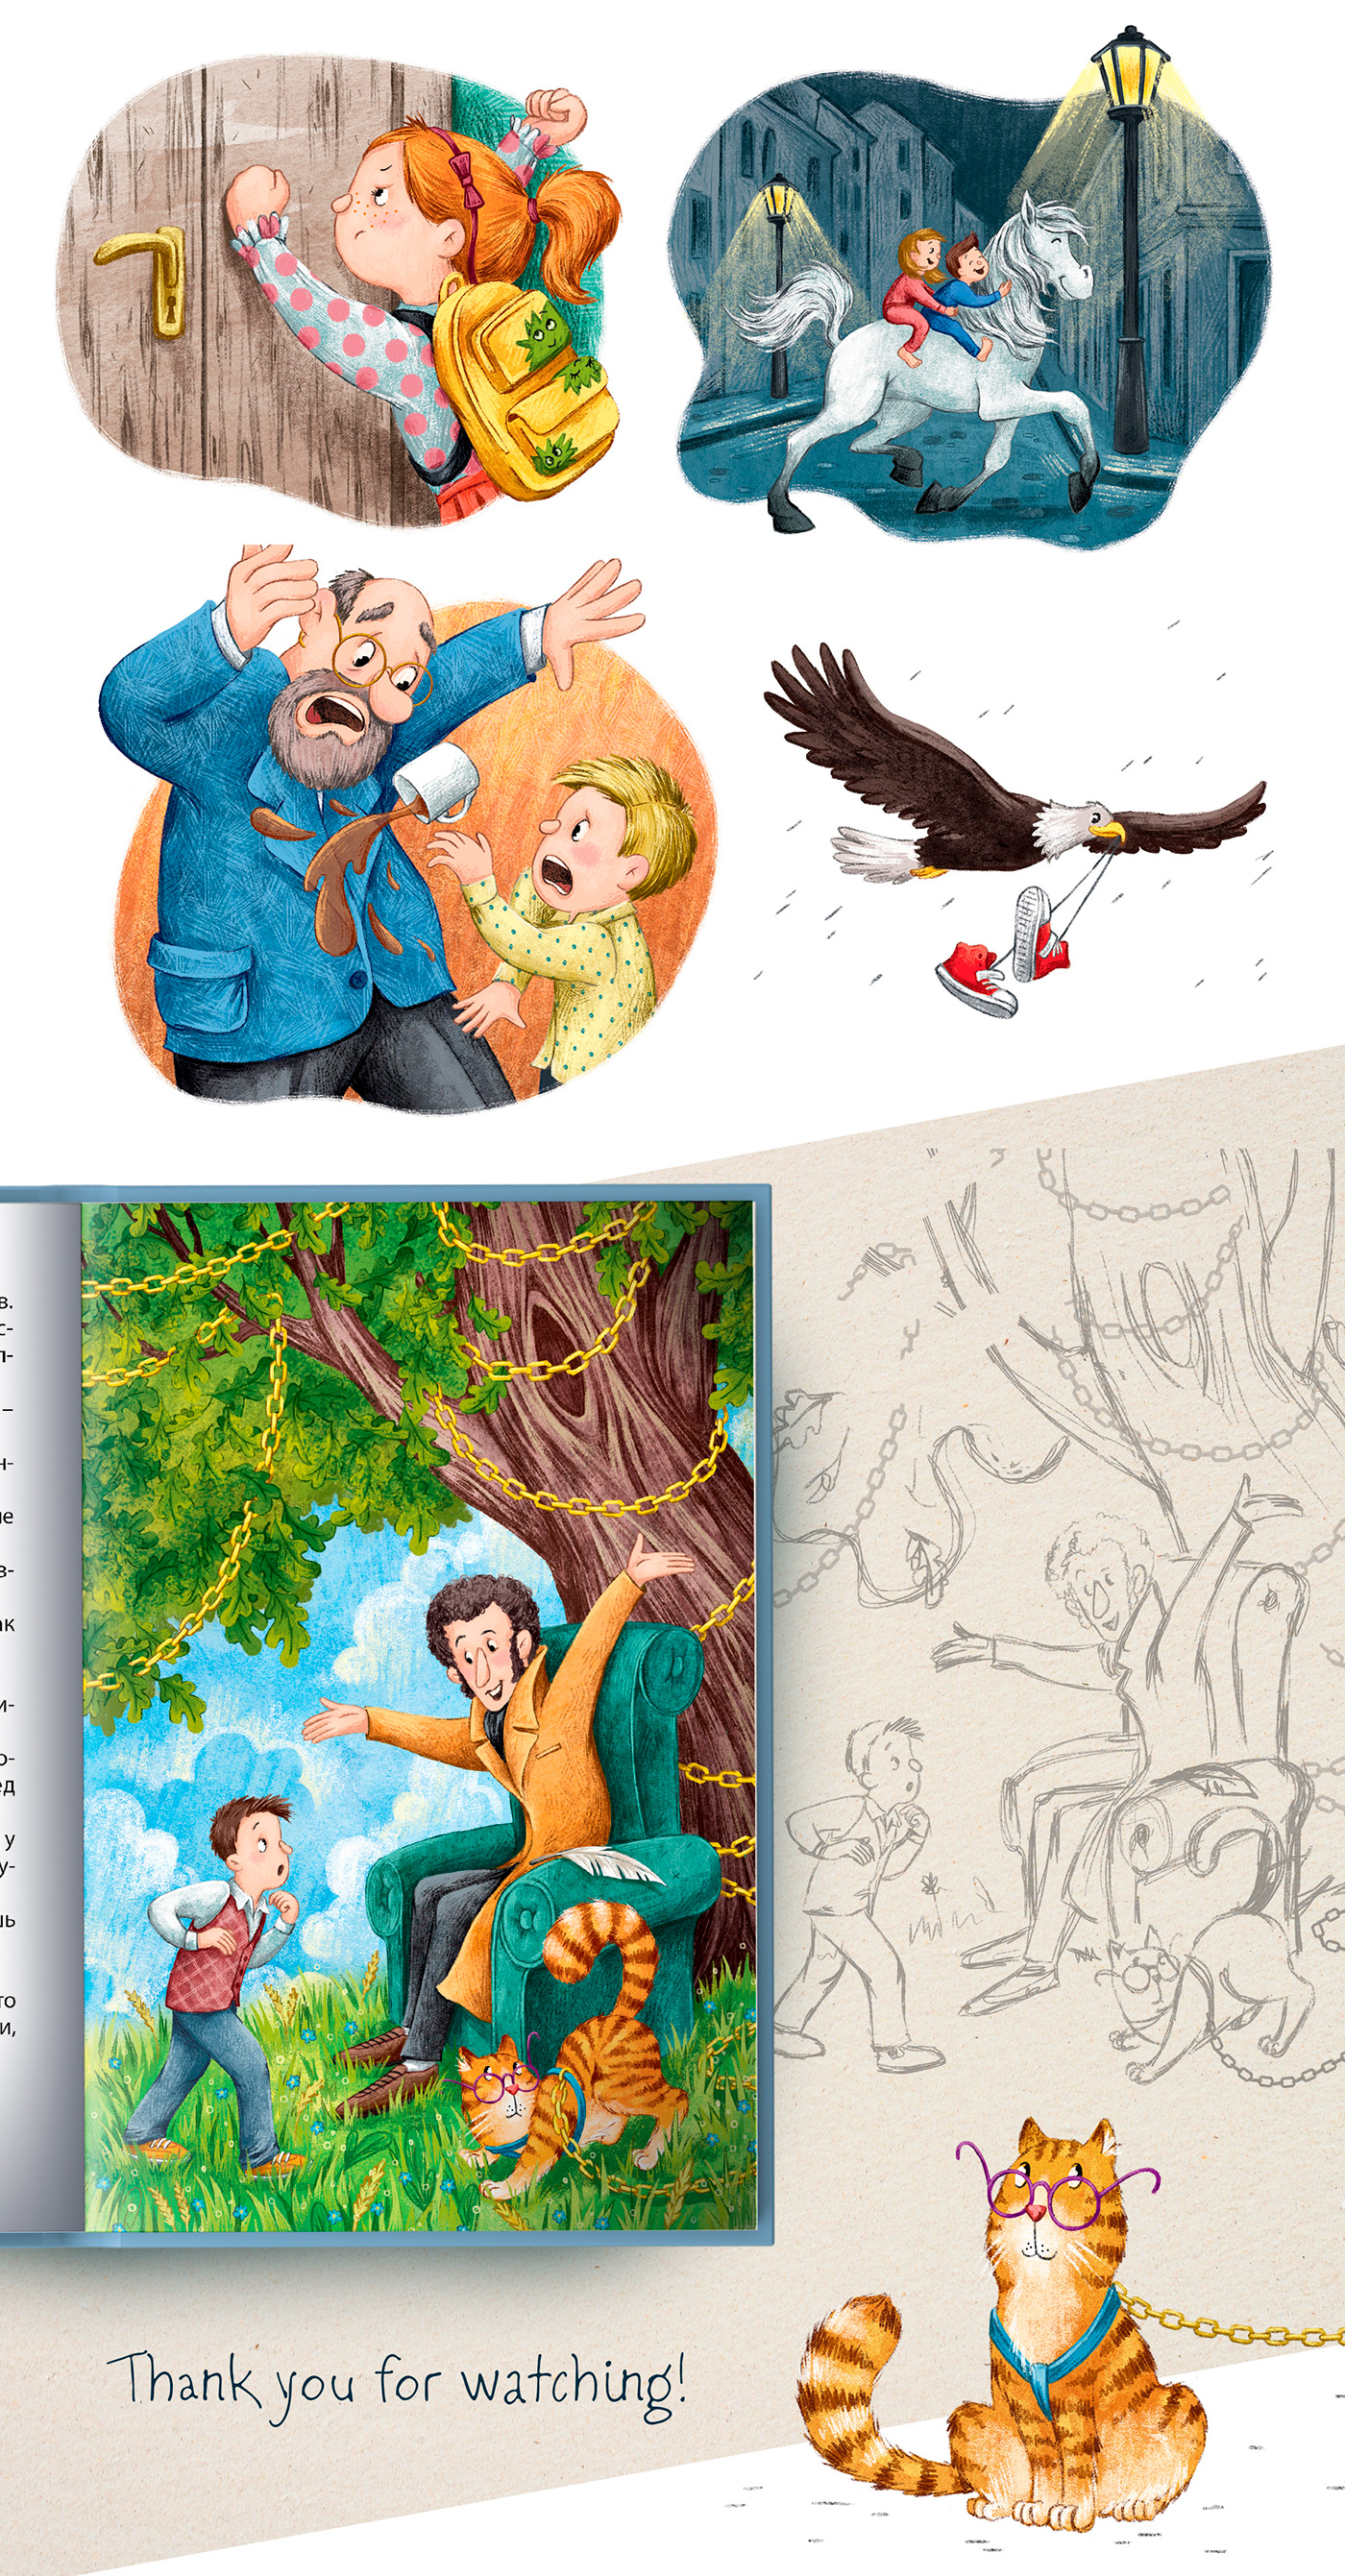 Illustrations for a book
with short funny stories
about children.